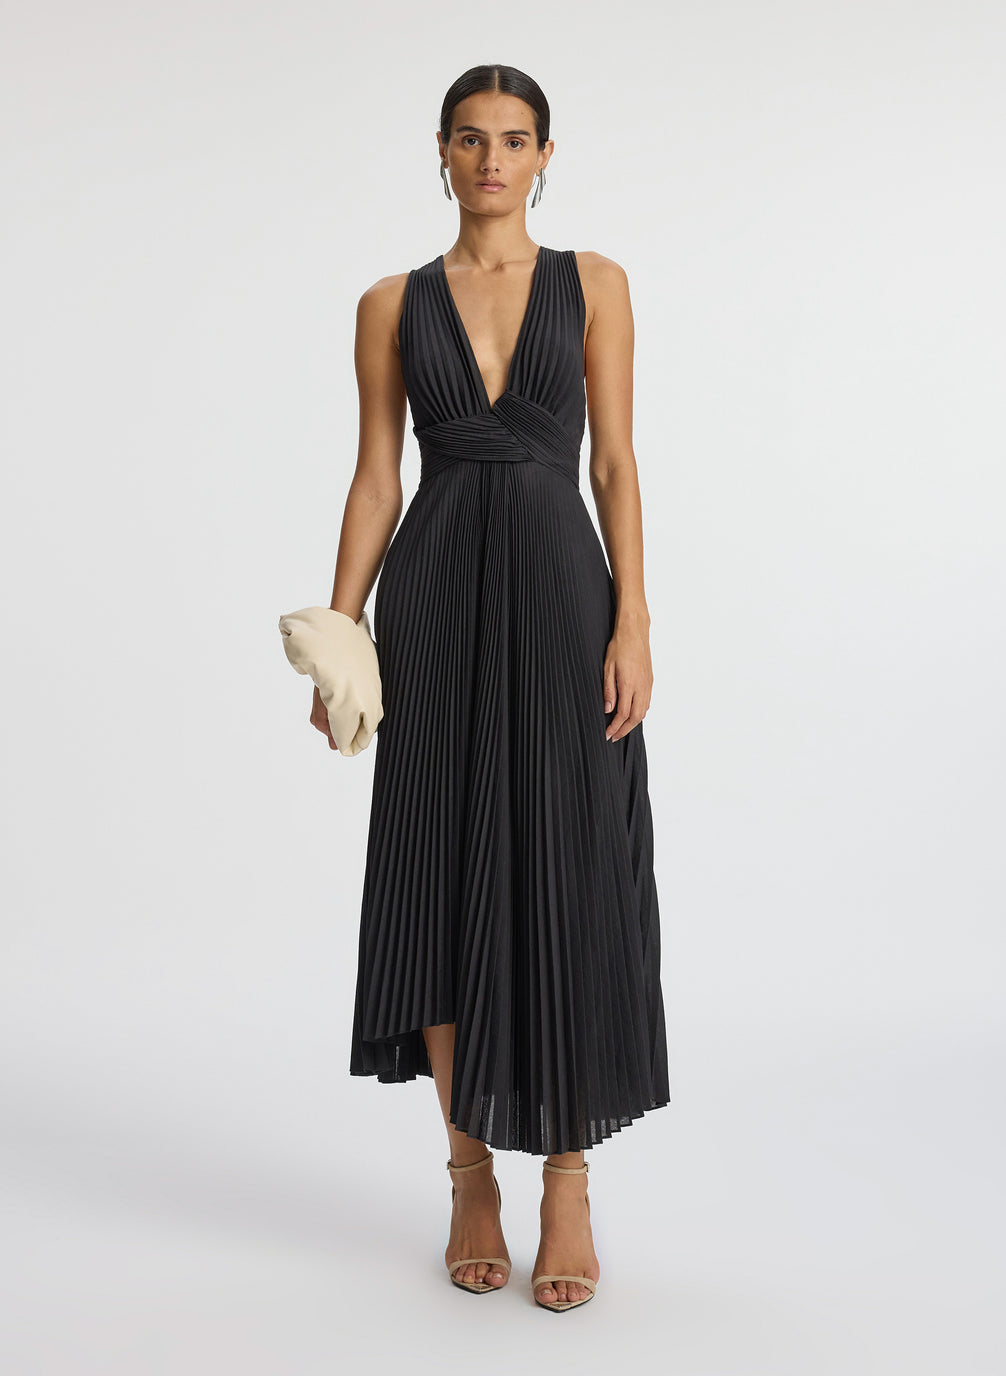 front view of woman wearing black deep v-neck pleated midi dress